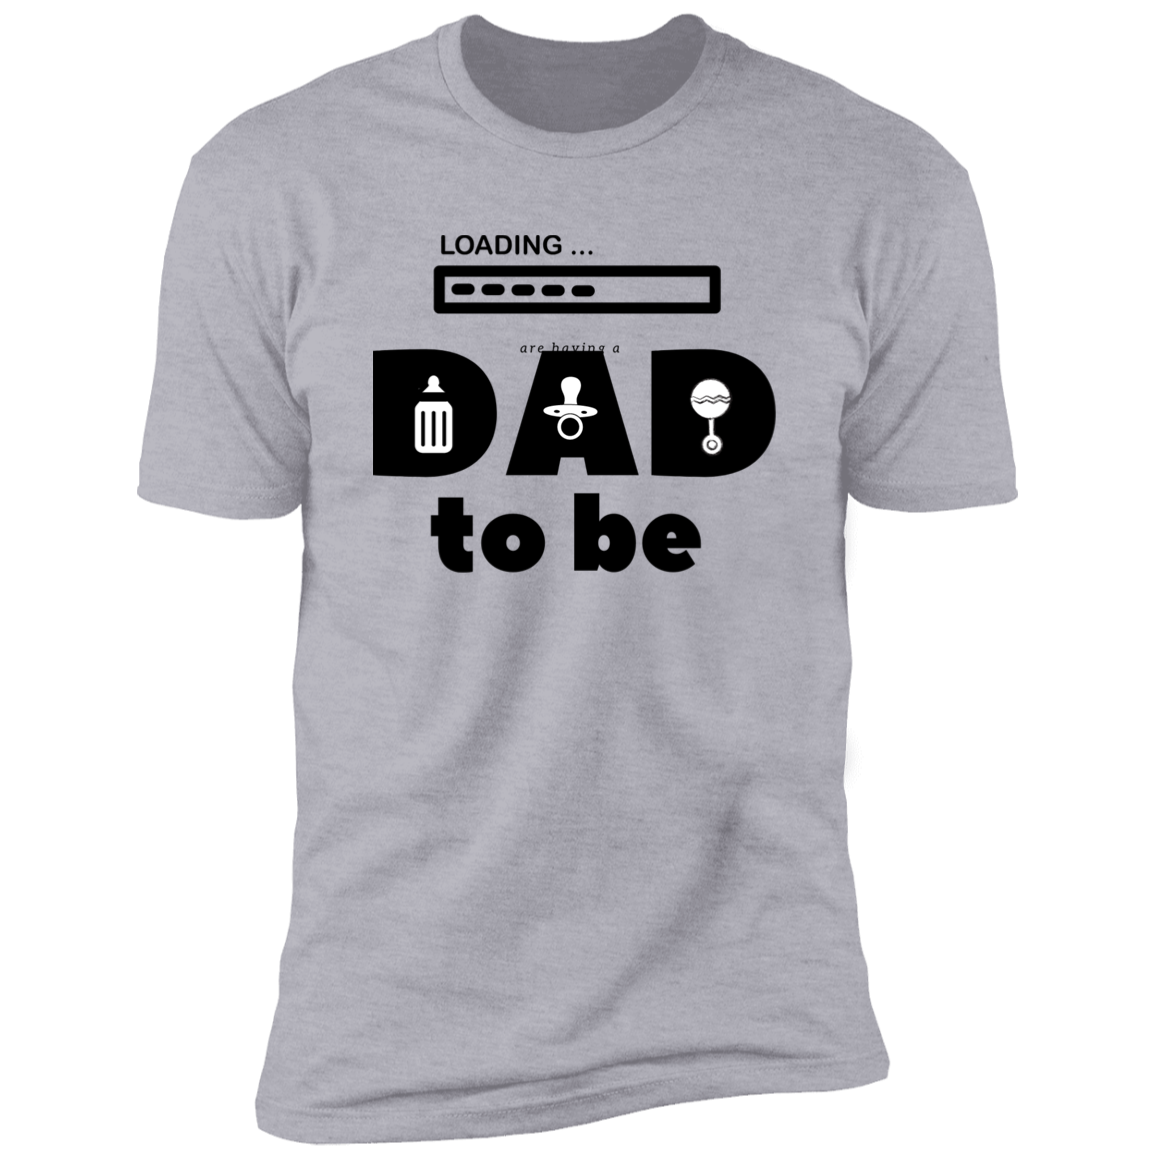 Dad To Be, Short Sleeve T-Shirt